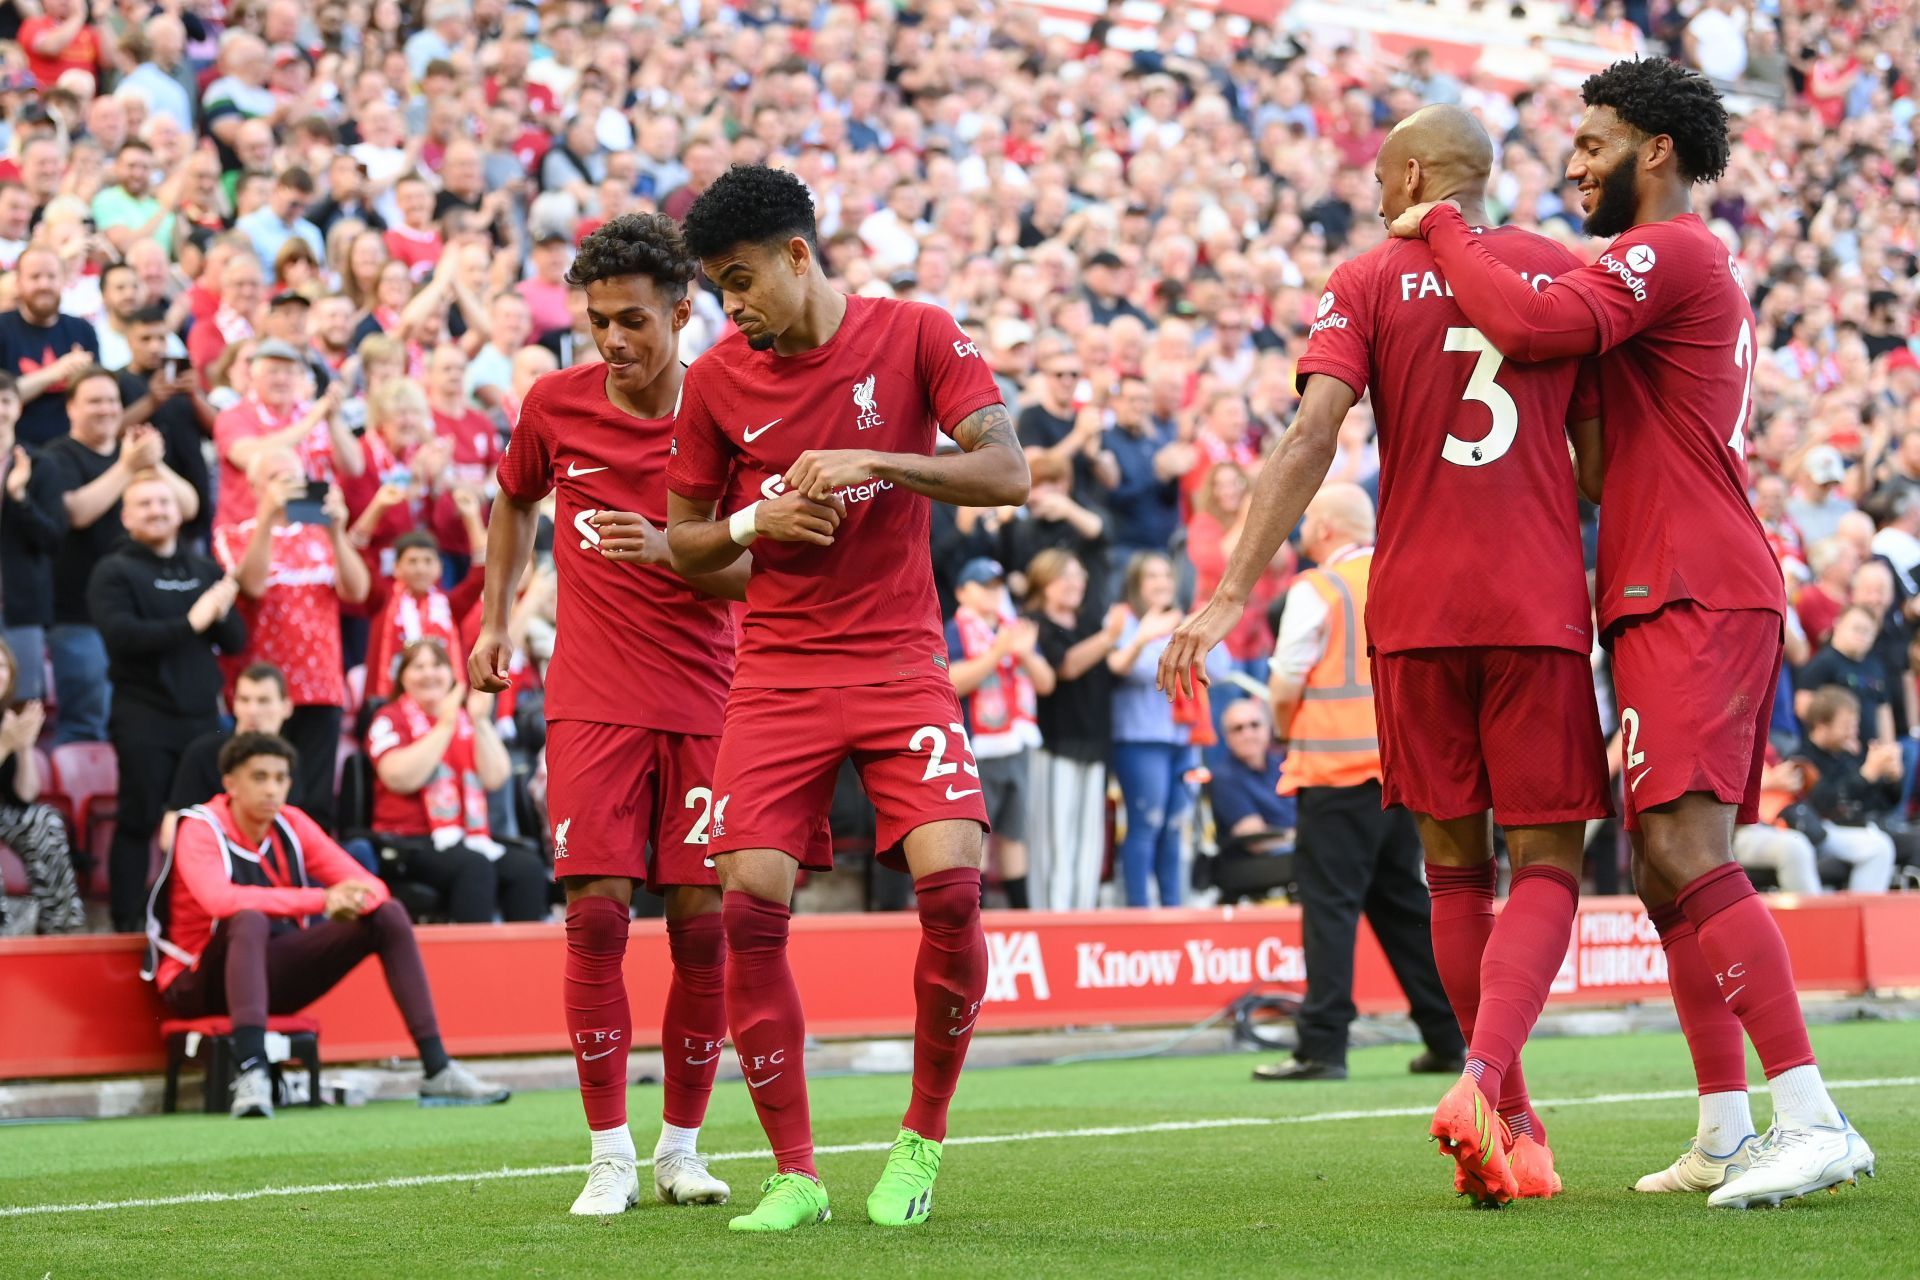 The Reds earned their first league victory of the season in spectacular fashion.